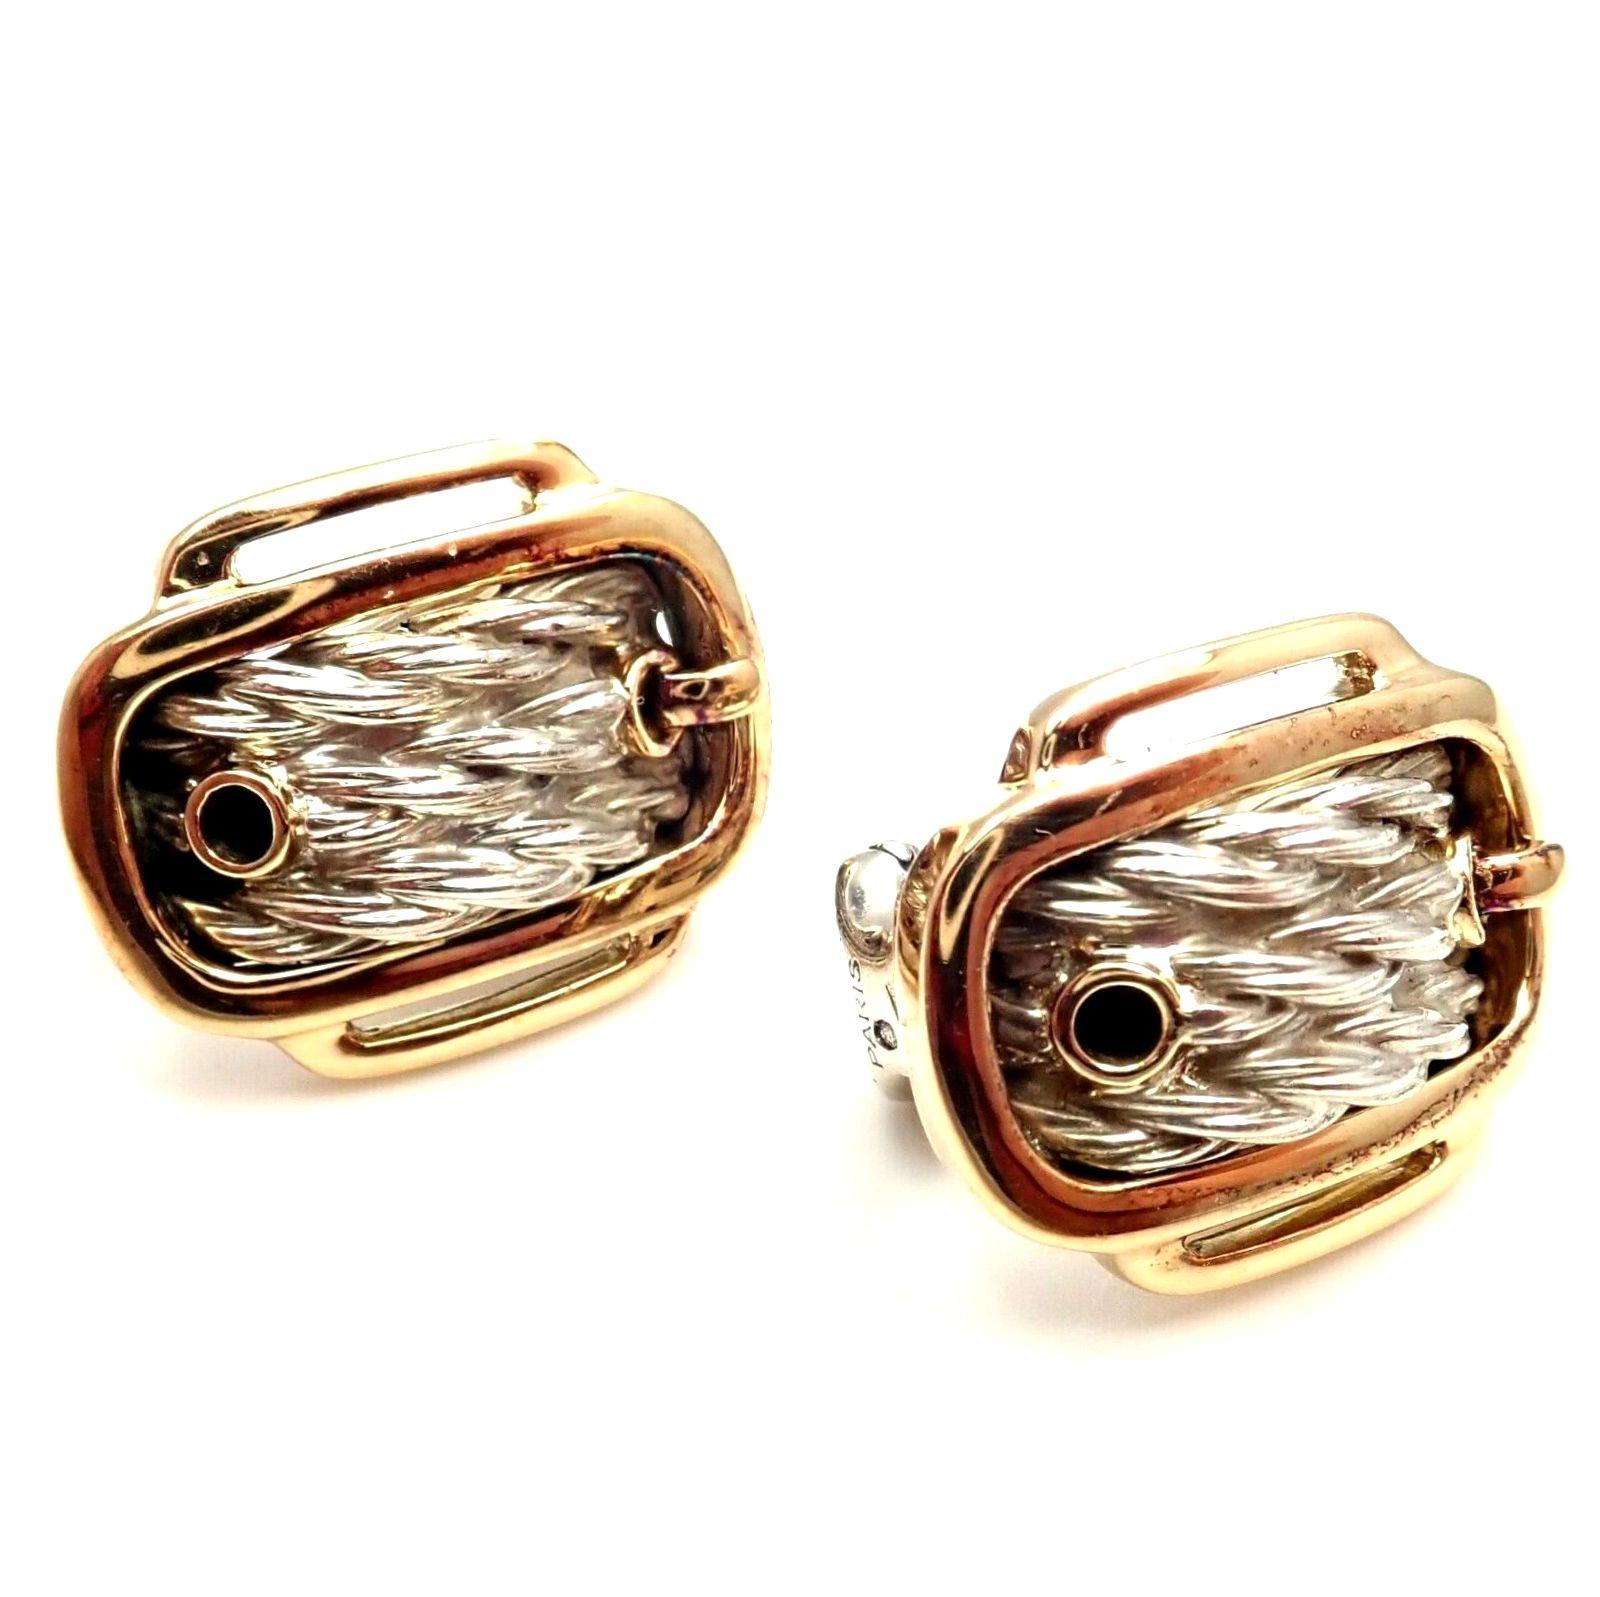 18k Yellow Gold Sapphire Earrings by Hermes.
With 2 round sapphires.
These earrings are for non pierced ears, but they can be changed for pierced by adding posts.
Details:
Measurements: 19mm x 16mm
Weight: 15.2 grams
Stamped Hallmarks: Hermes Paris